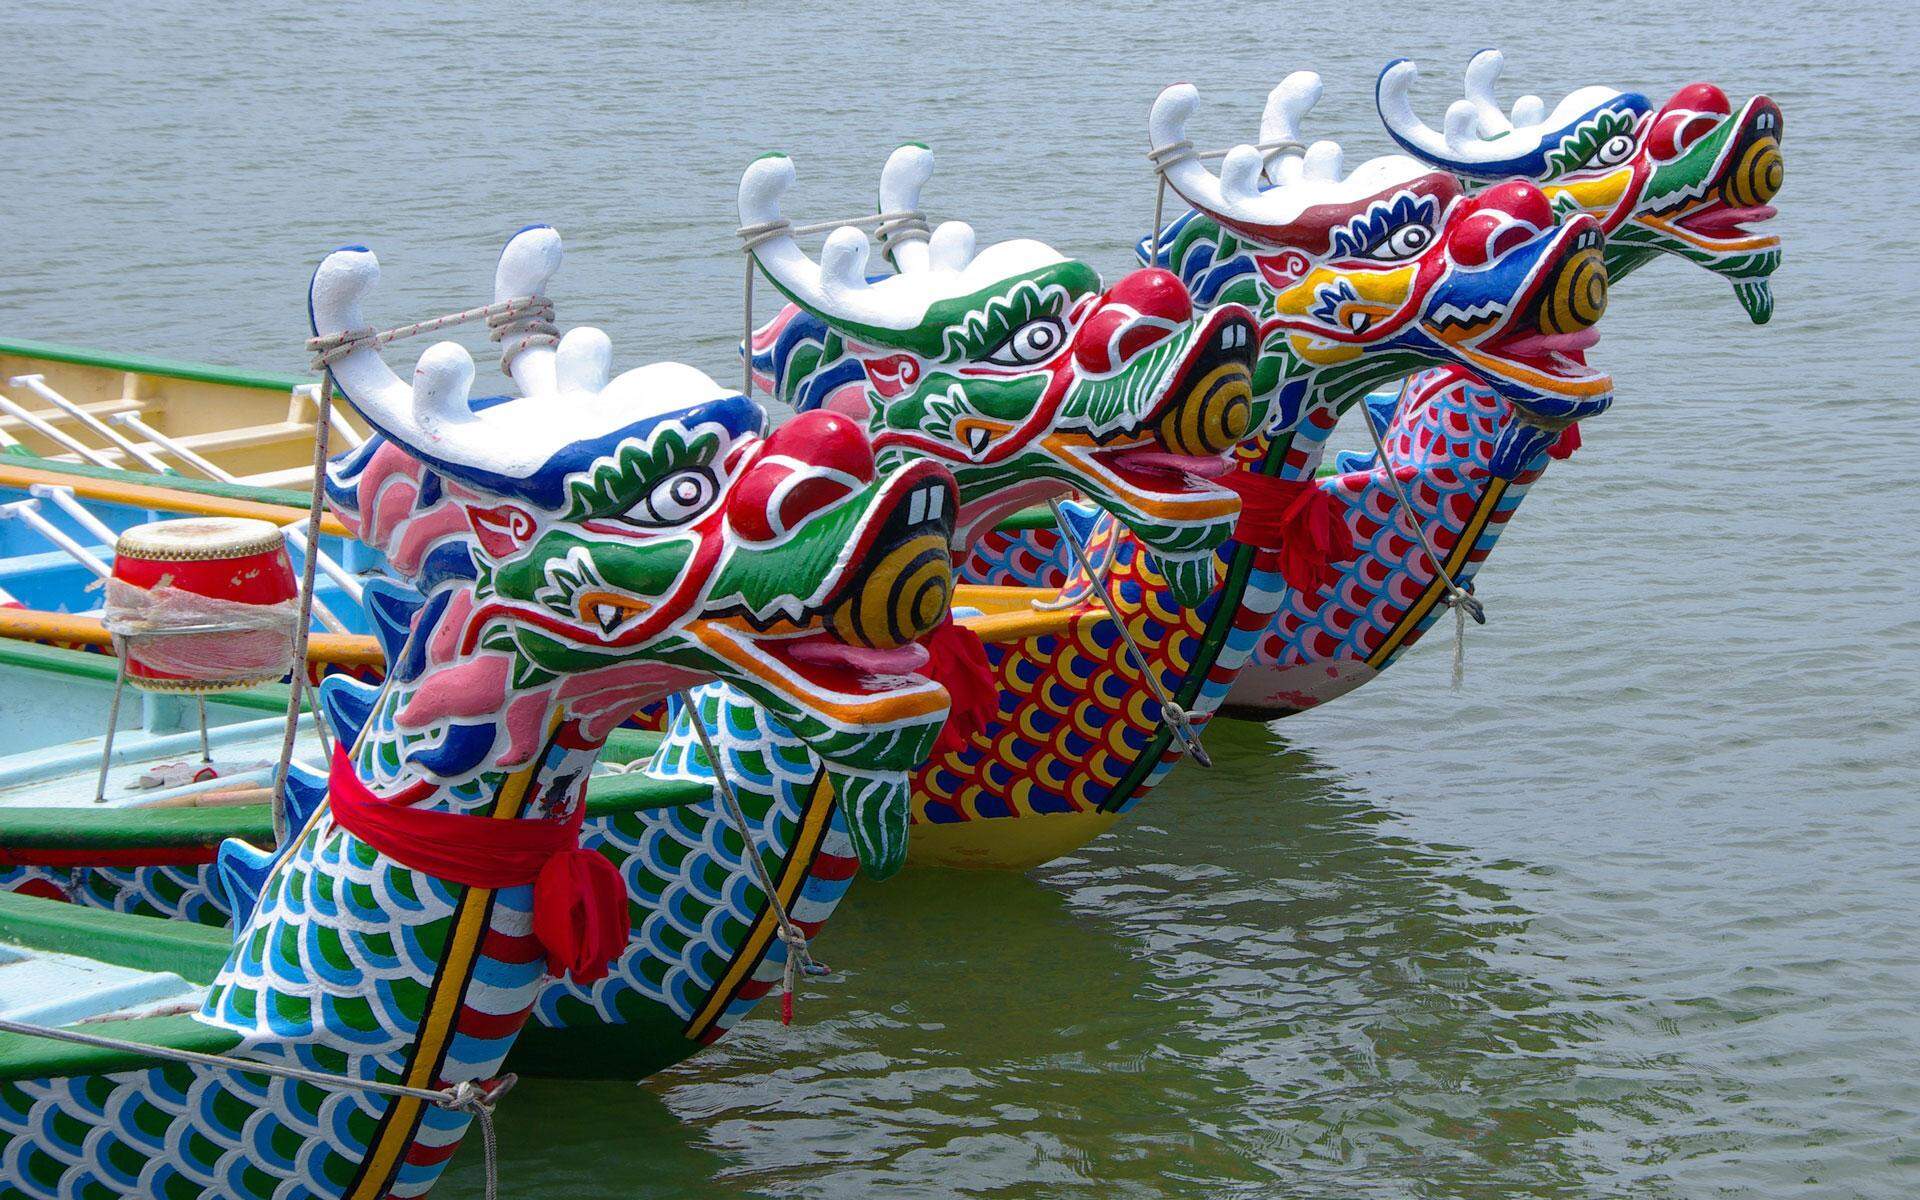 8-facts-about-duanwu-festival-dragon-boat-festival